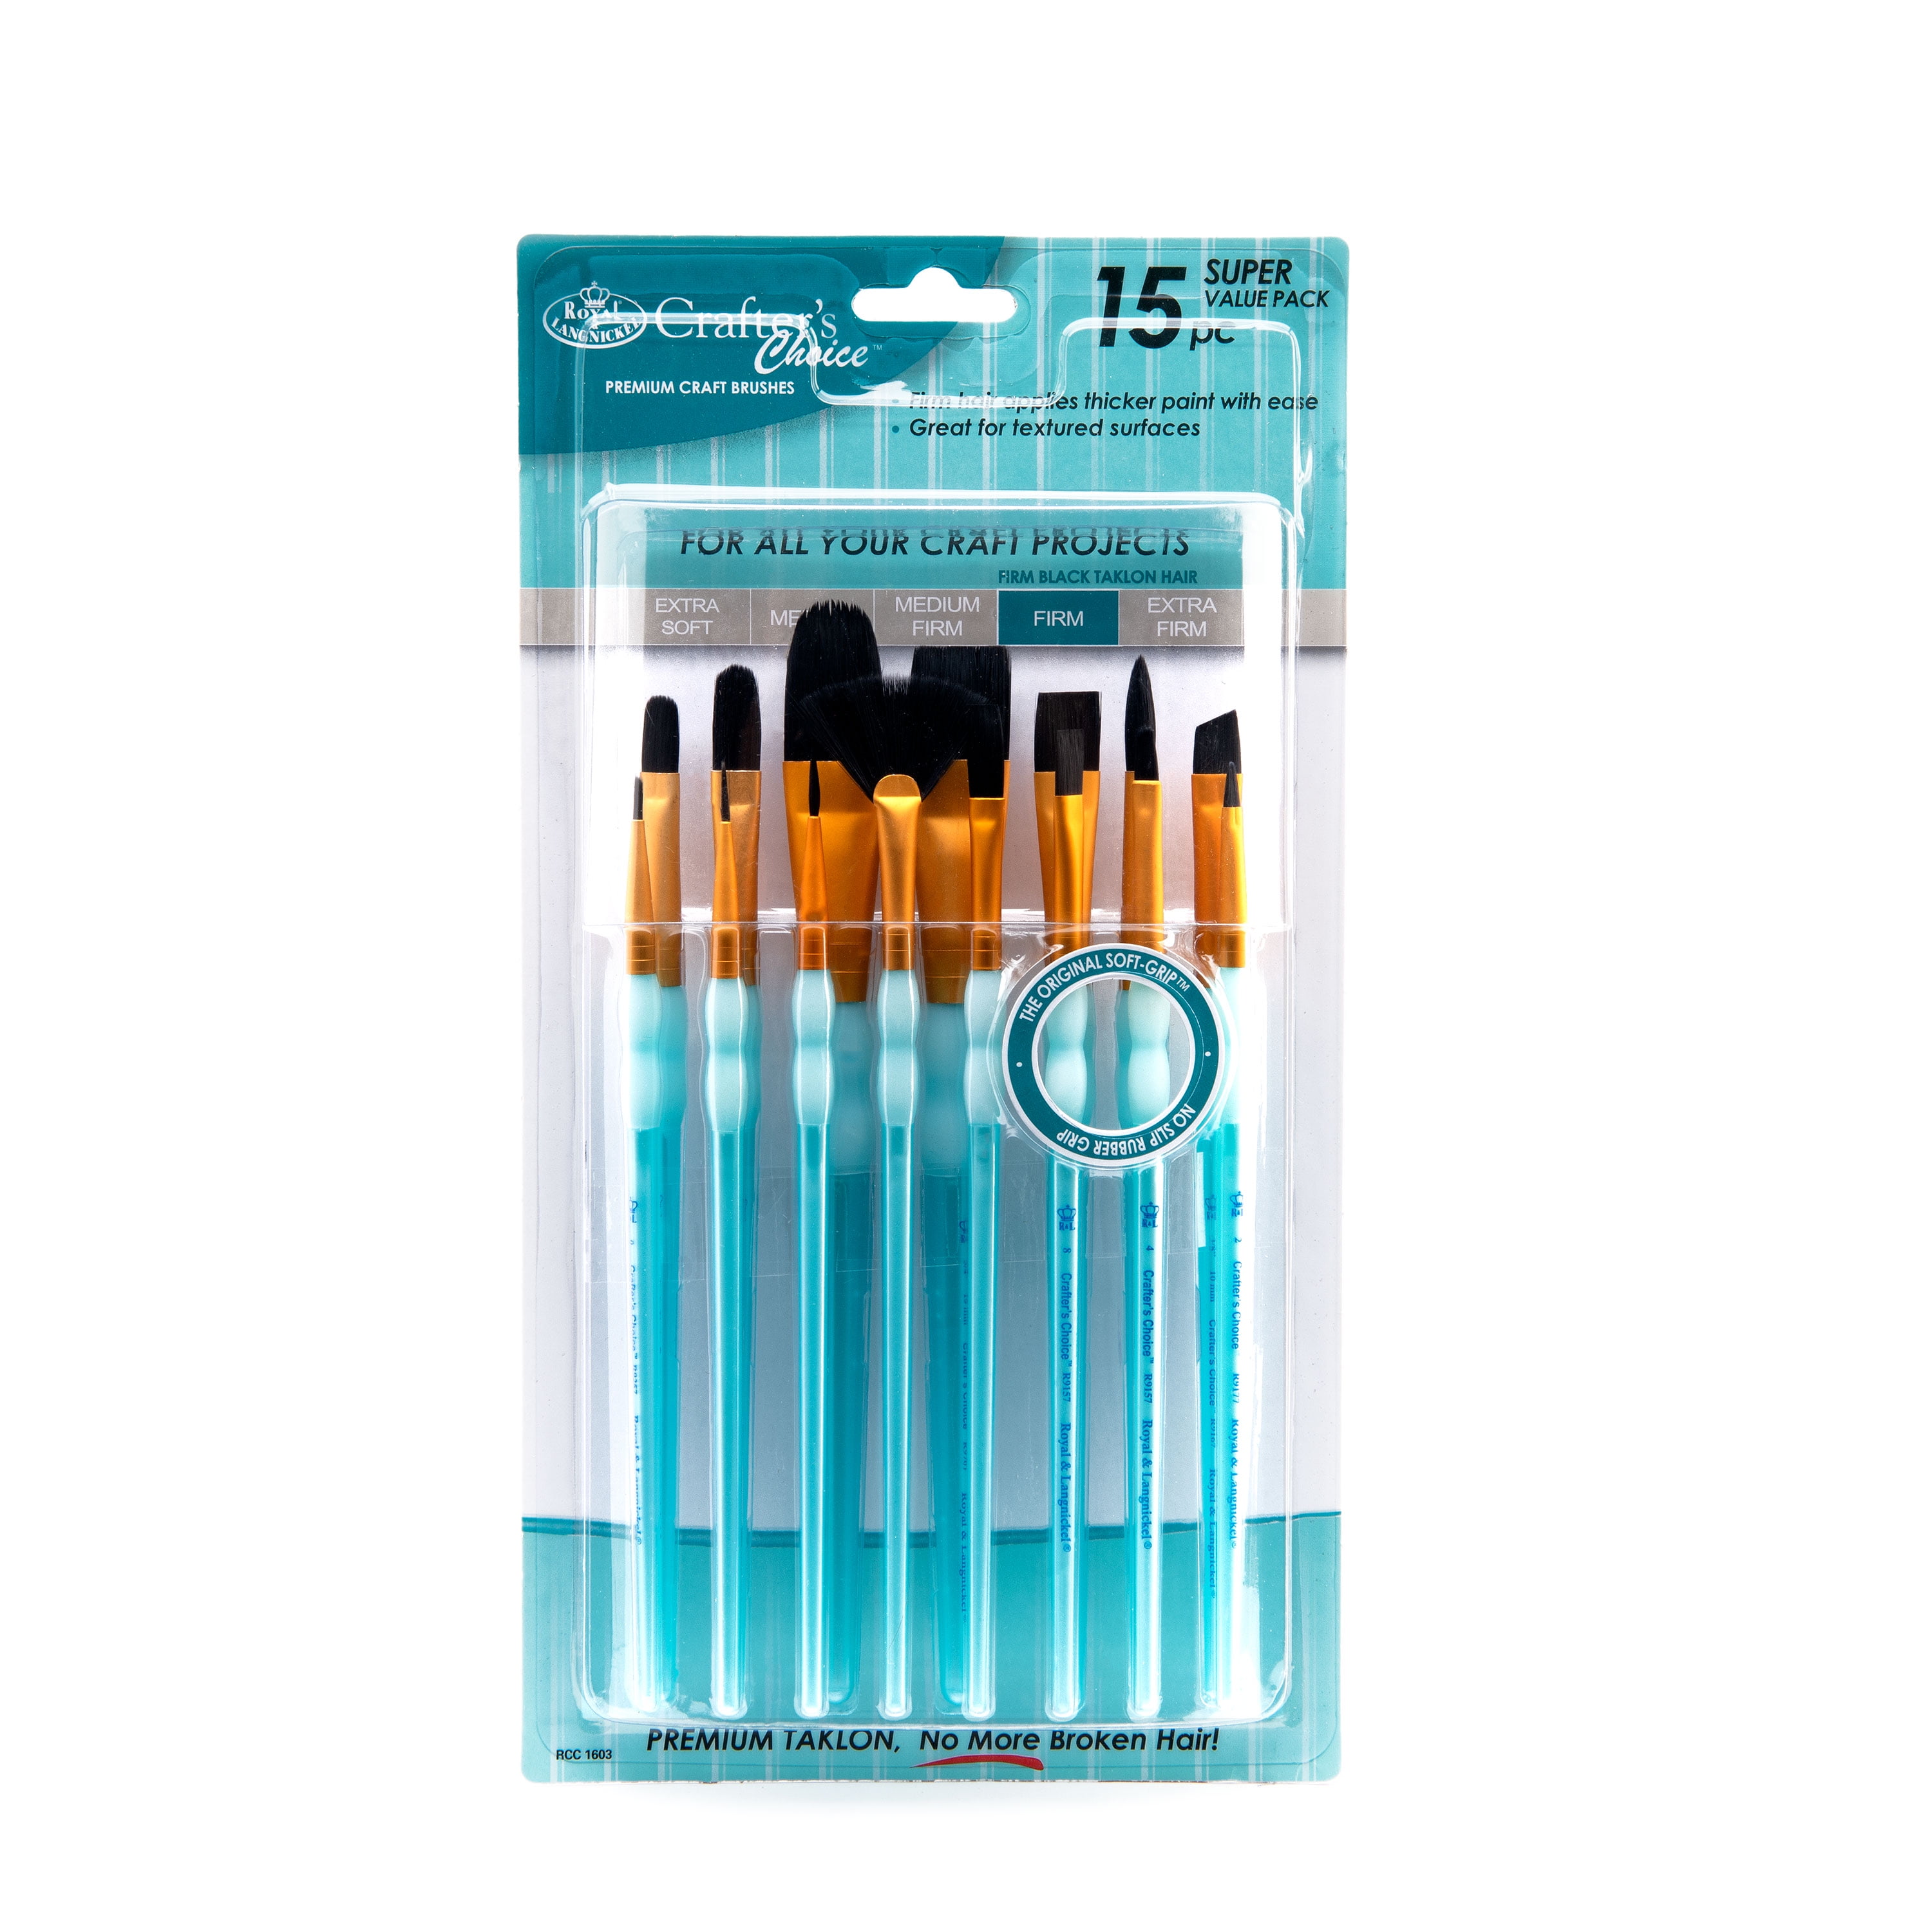 Royal & Langnickel Crafter's Choice Synthetic Black Taklon Paint Brush Set,  15pc